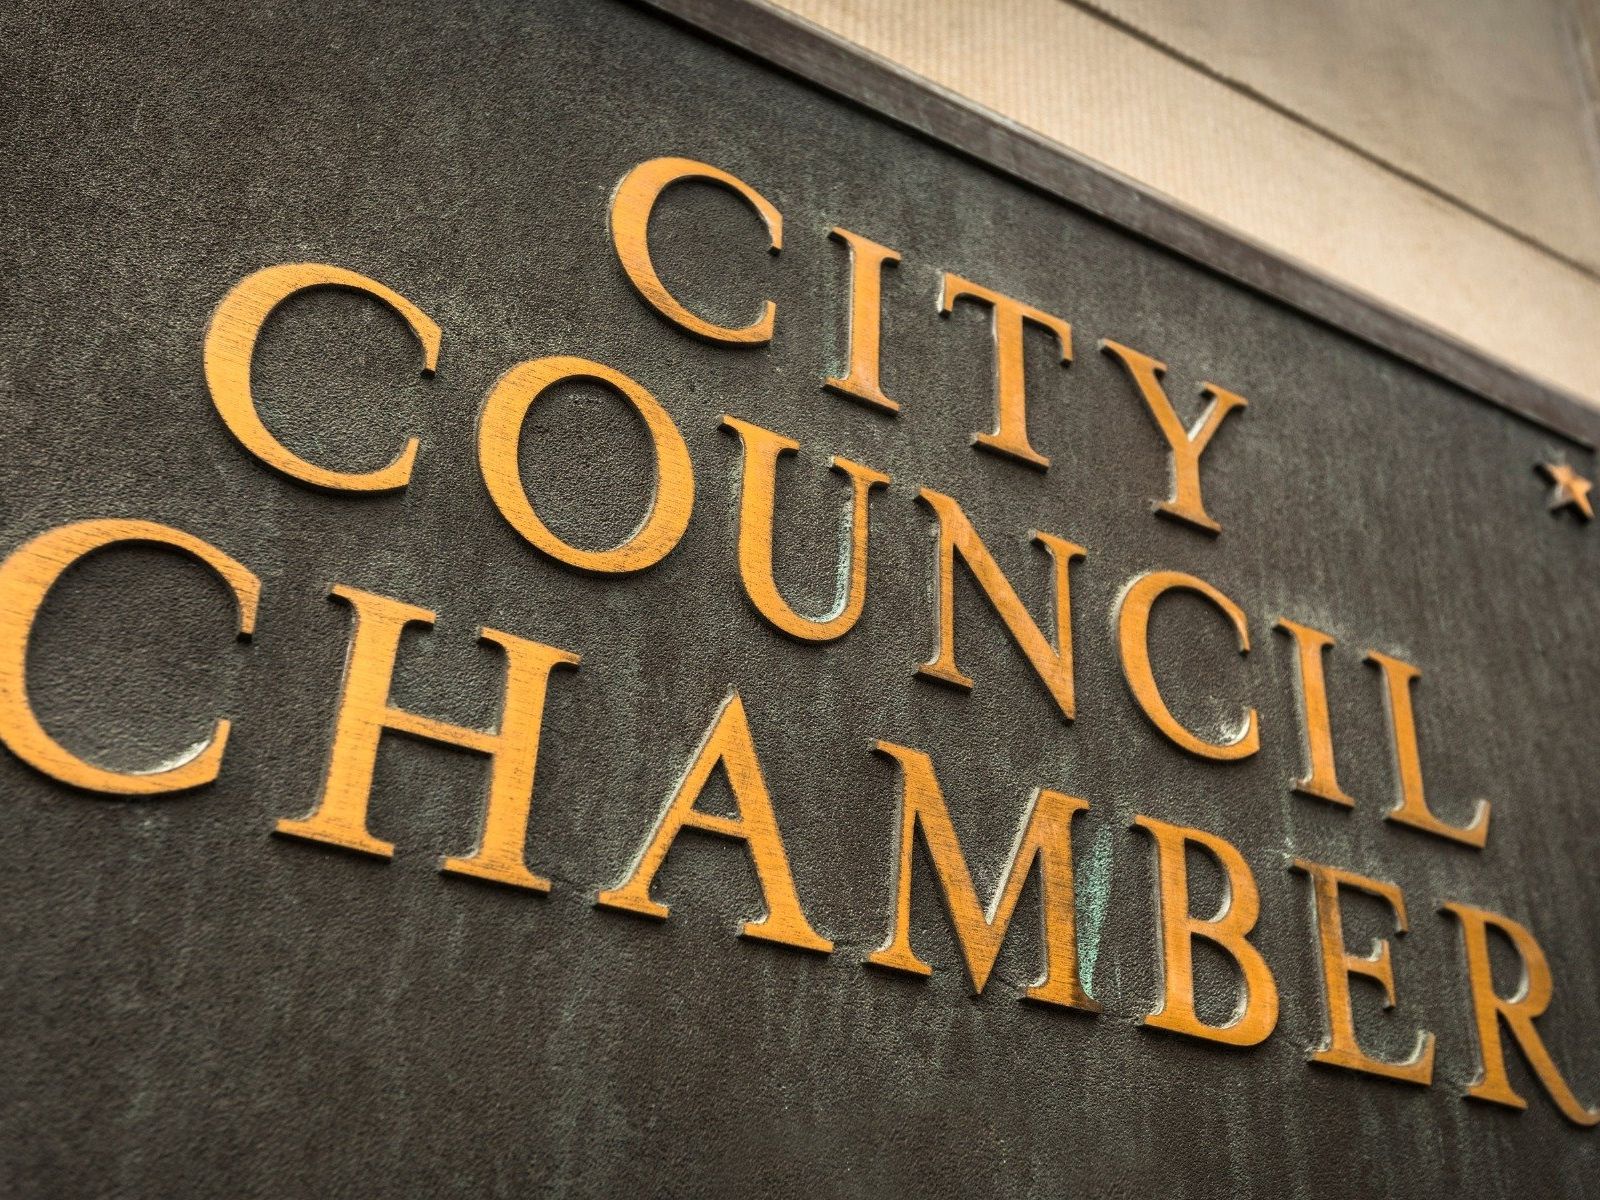 city council chamber sign photo